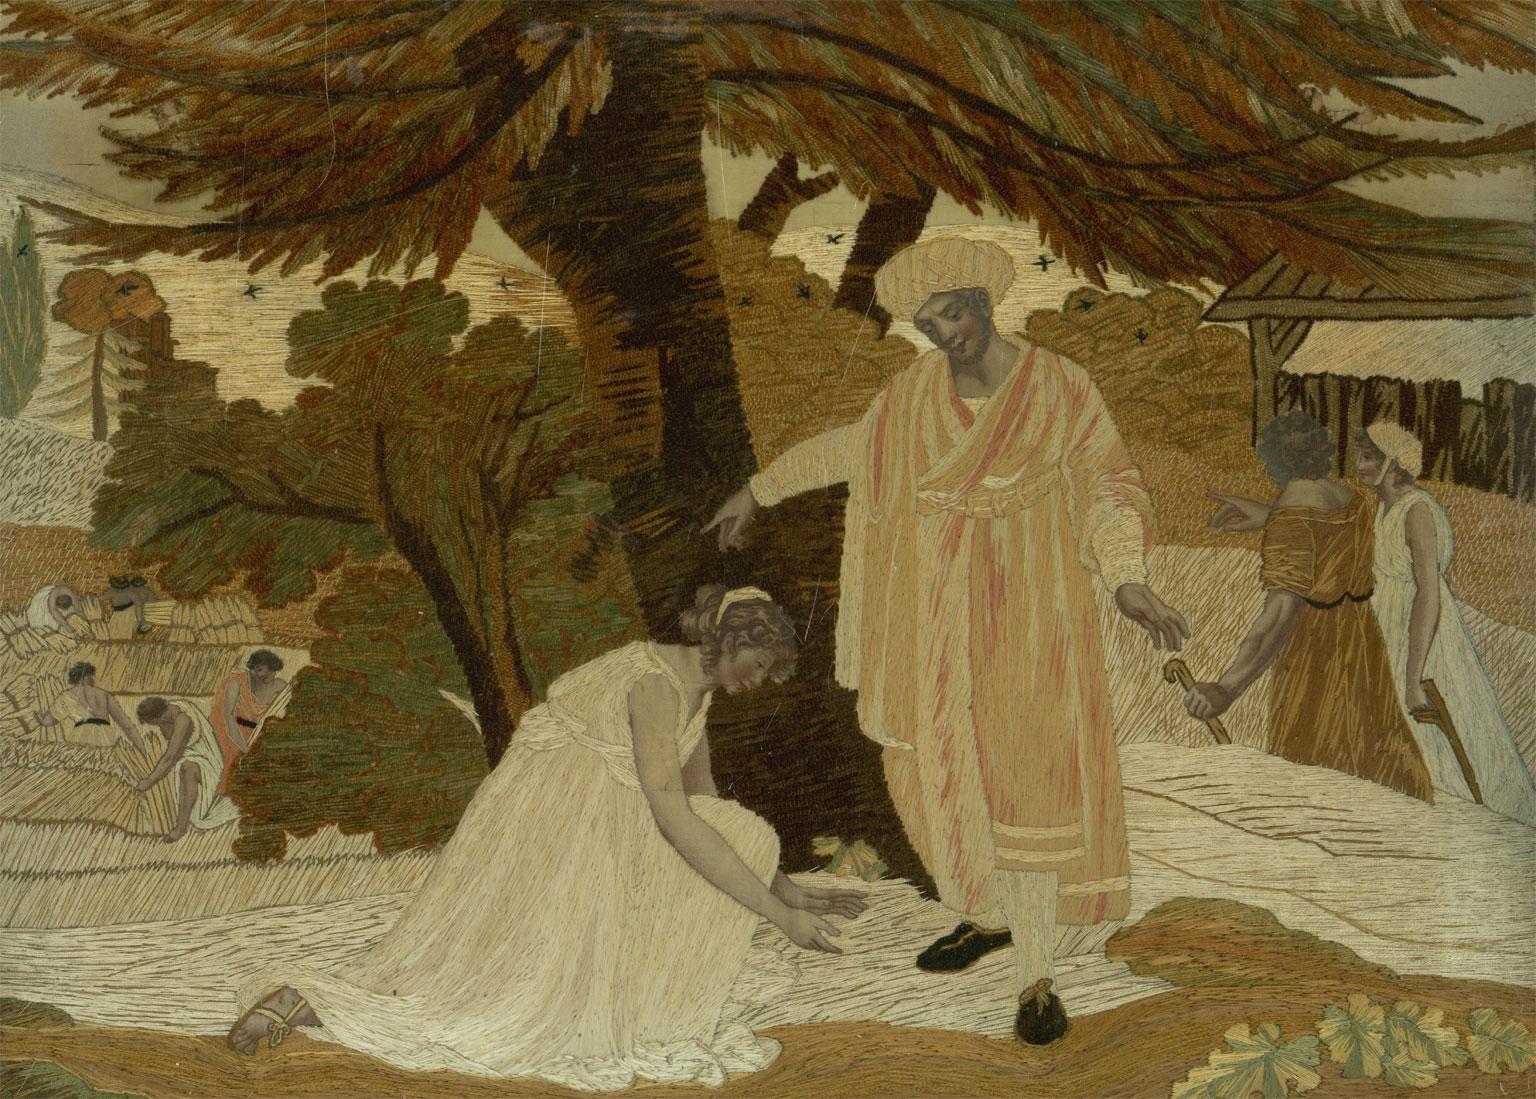 An exceptional early 19th century silkwork picture of an classical scene, possibly religious, depicting a robed man and a kneeling robed woman with figures harvesting corn in the background. The artwork is unsigned.

Image Size: 35 x 47.2cm (13.8